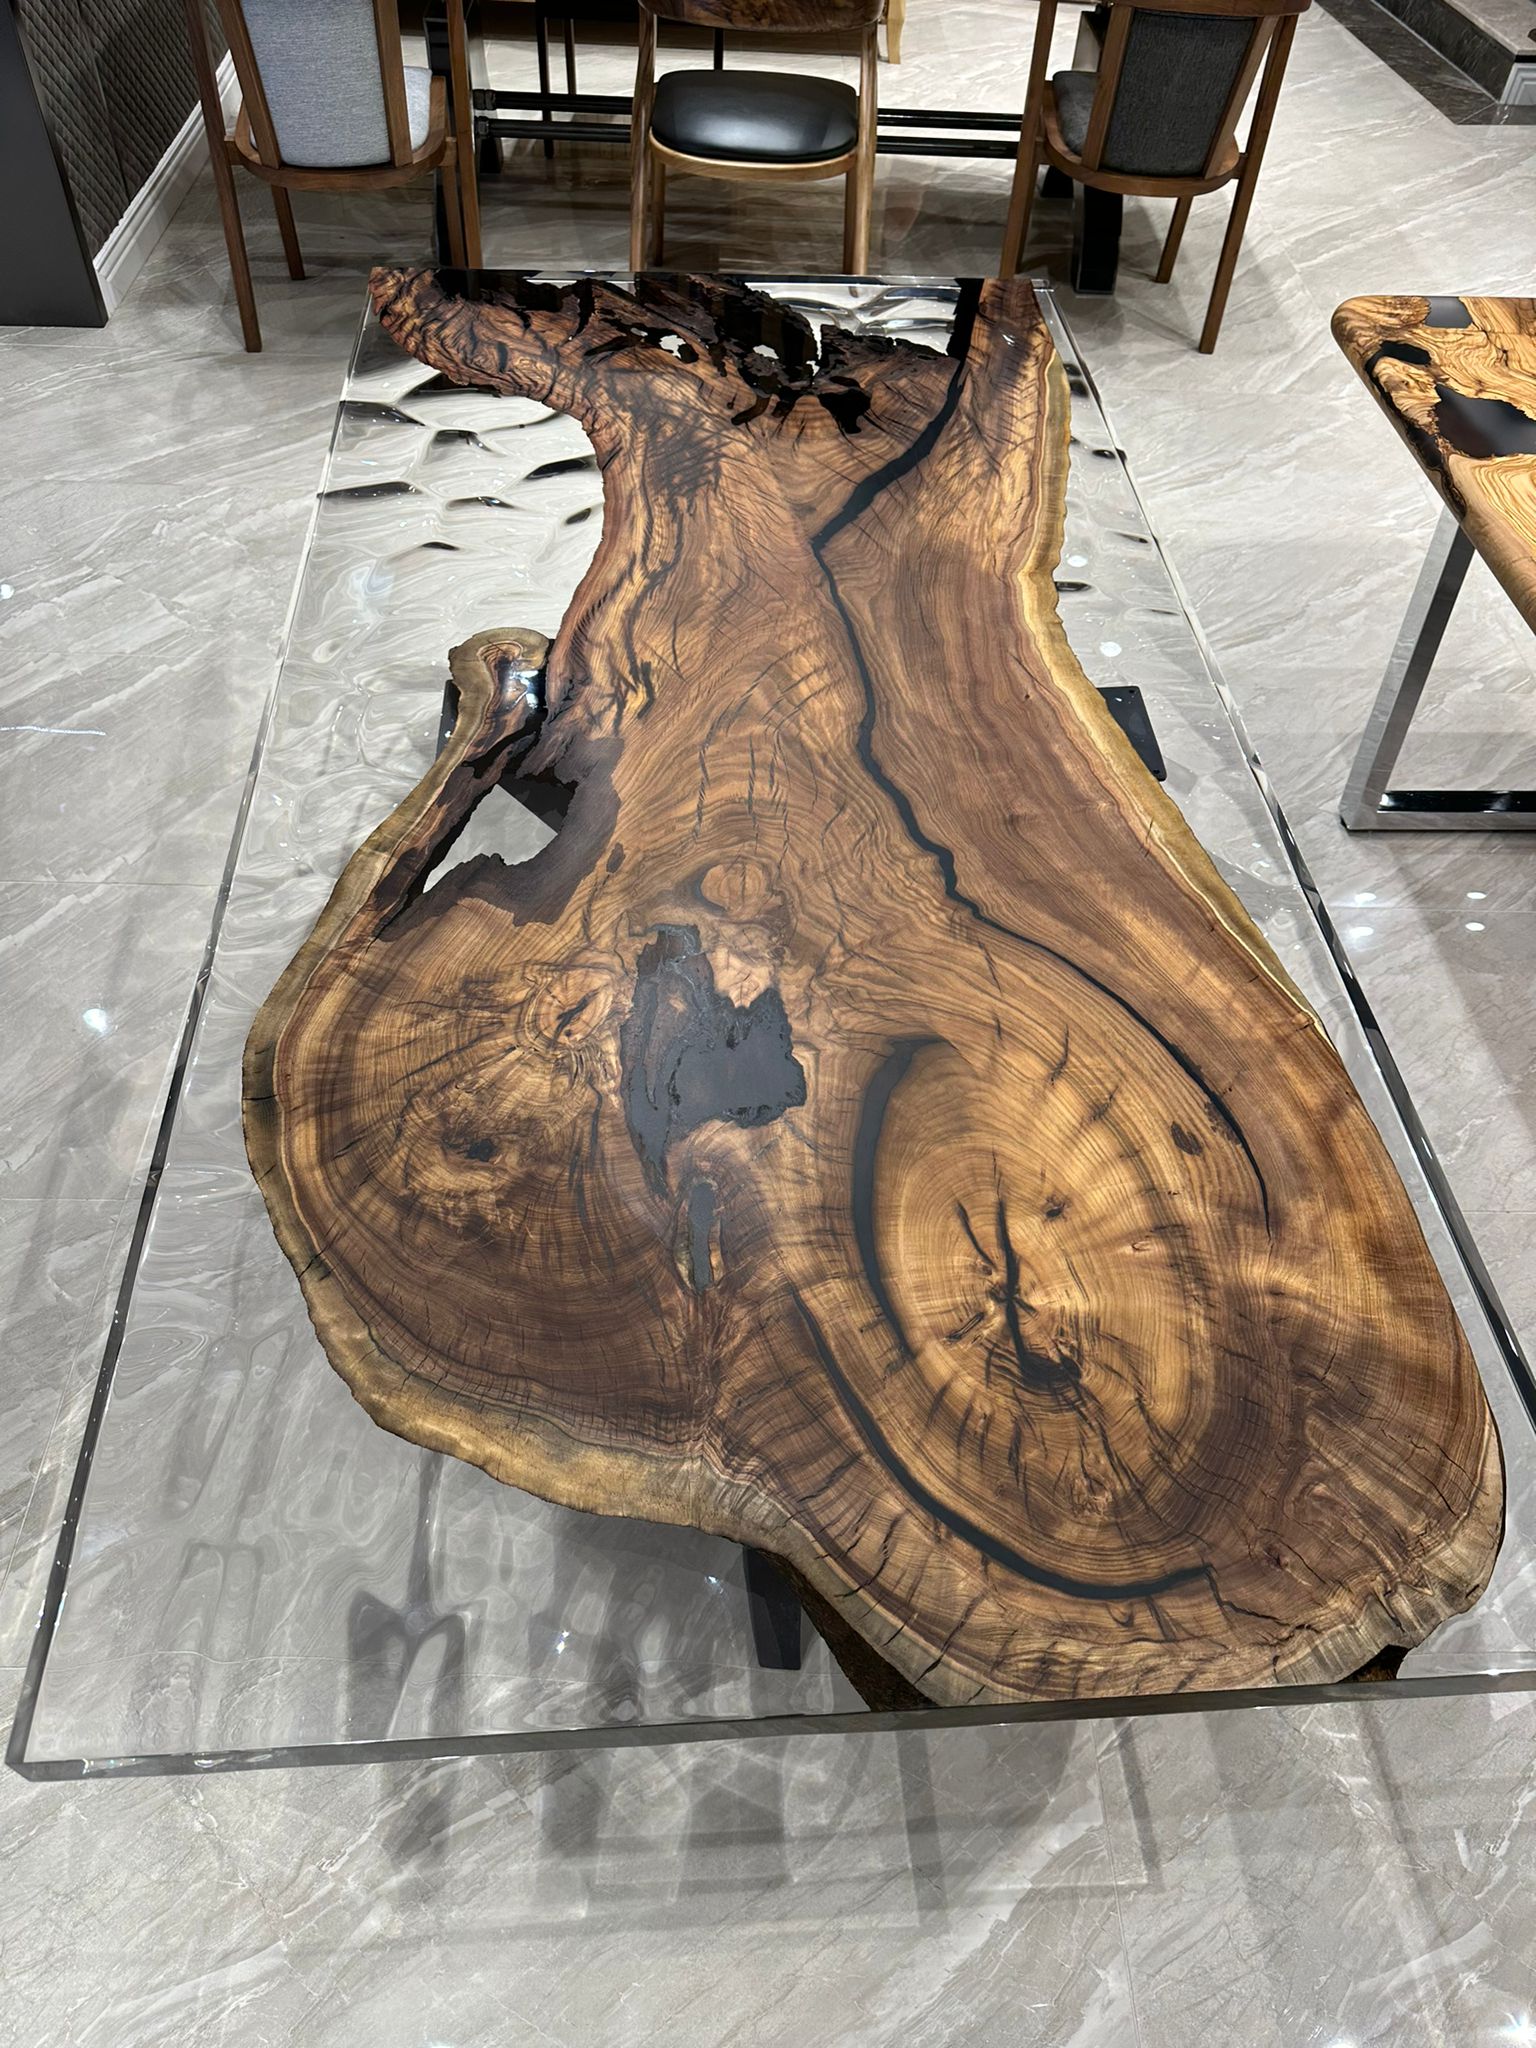 Live Edge Epoxy Dining Table - In Stock